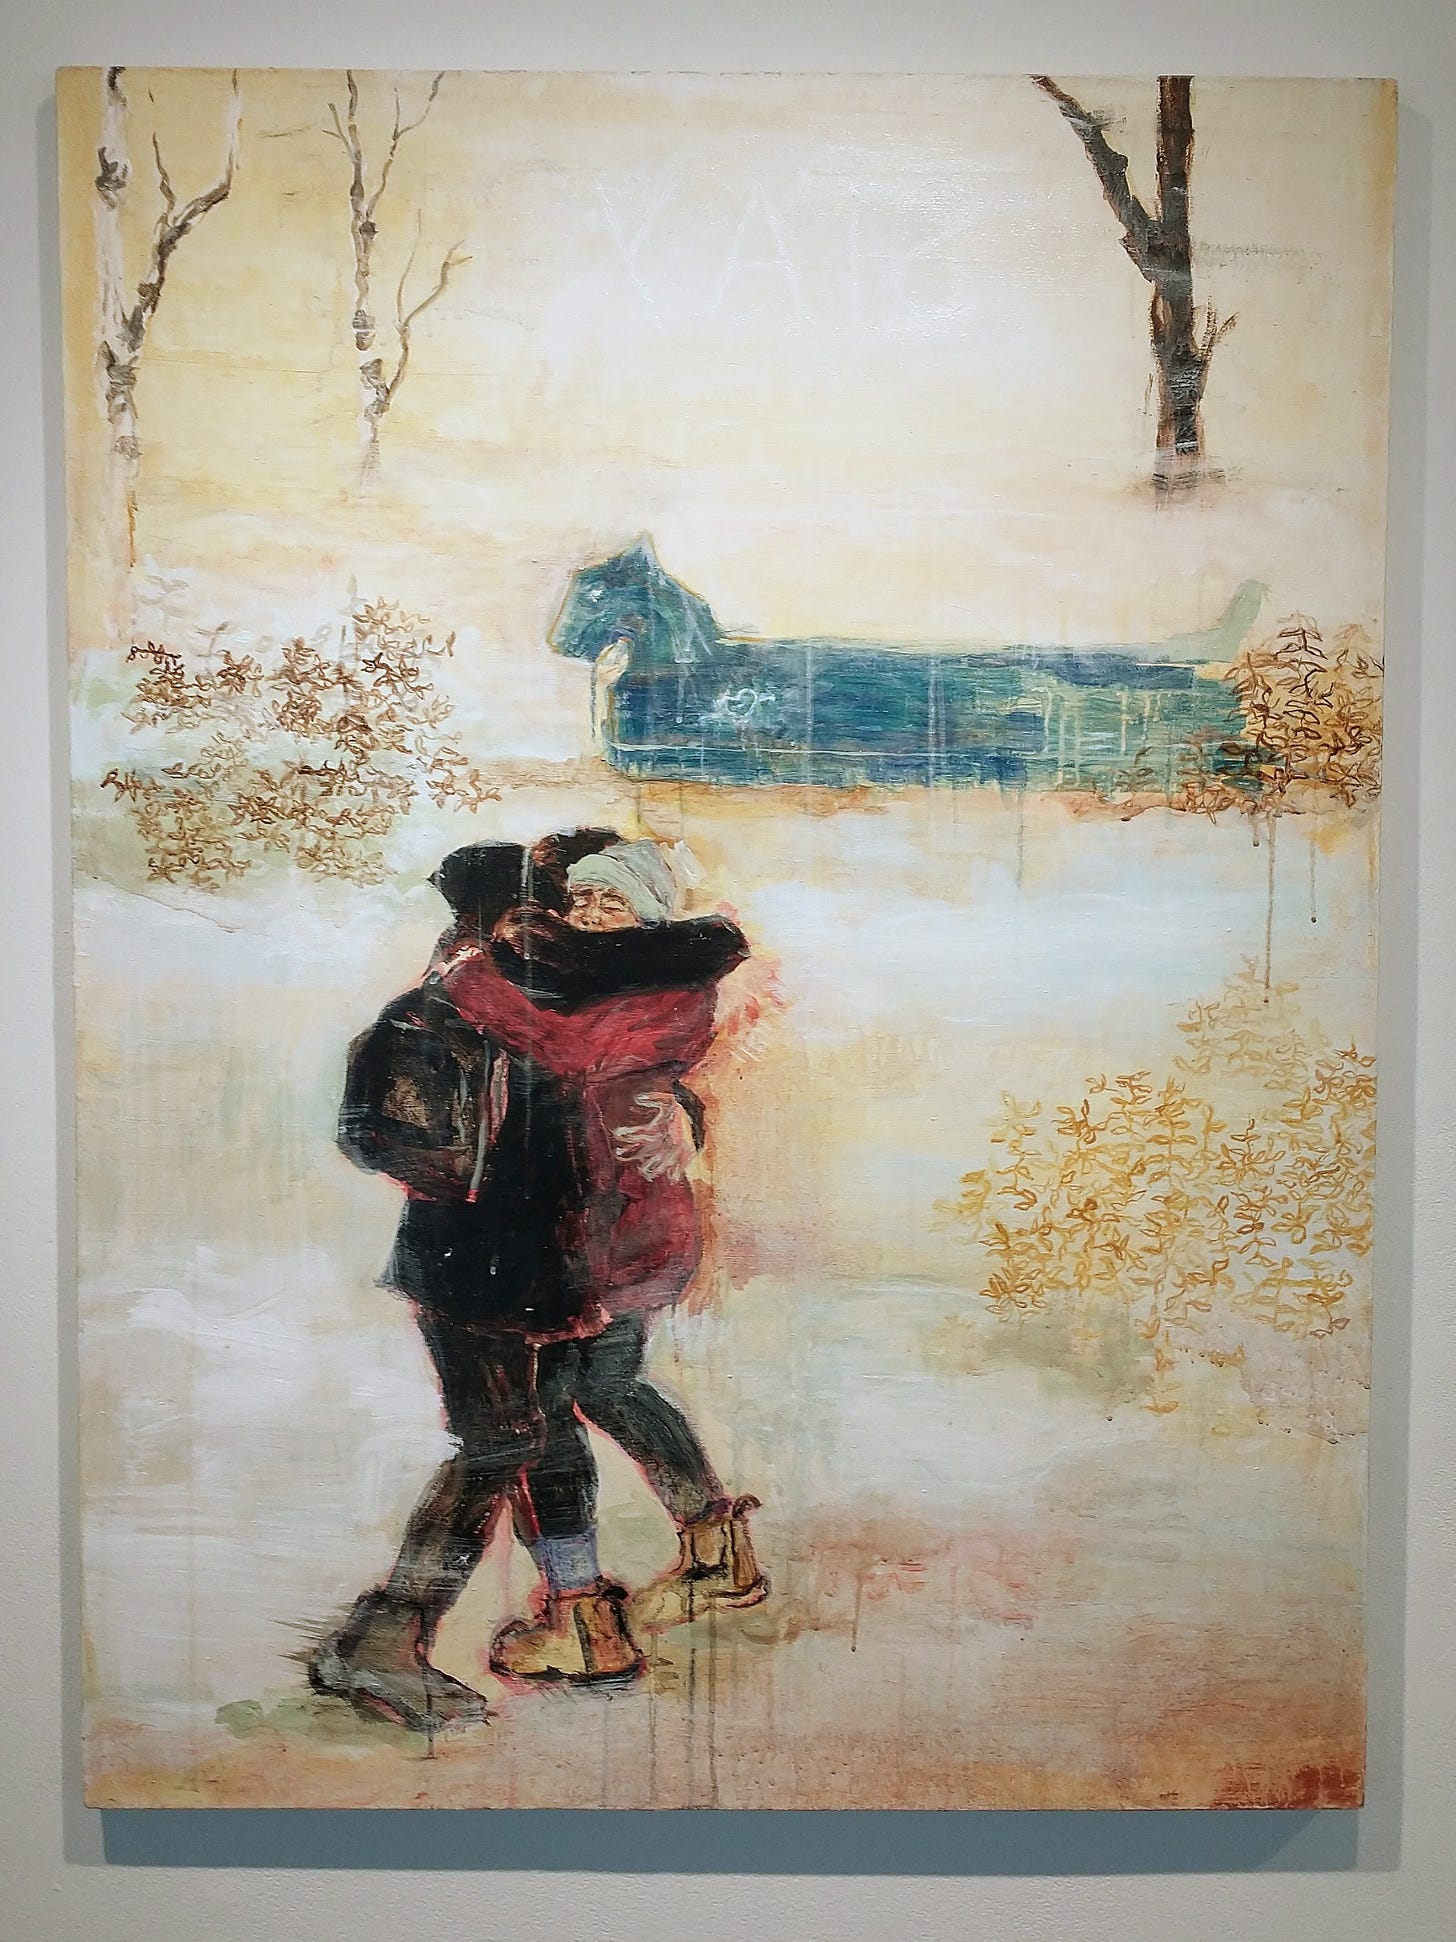 Painting of a winter scene with two young adults hugging in the foreground and a spectral blue horse figure in the background next to trees and shrubs